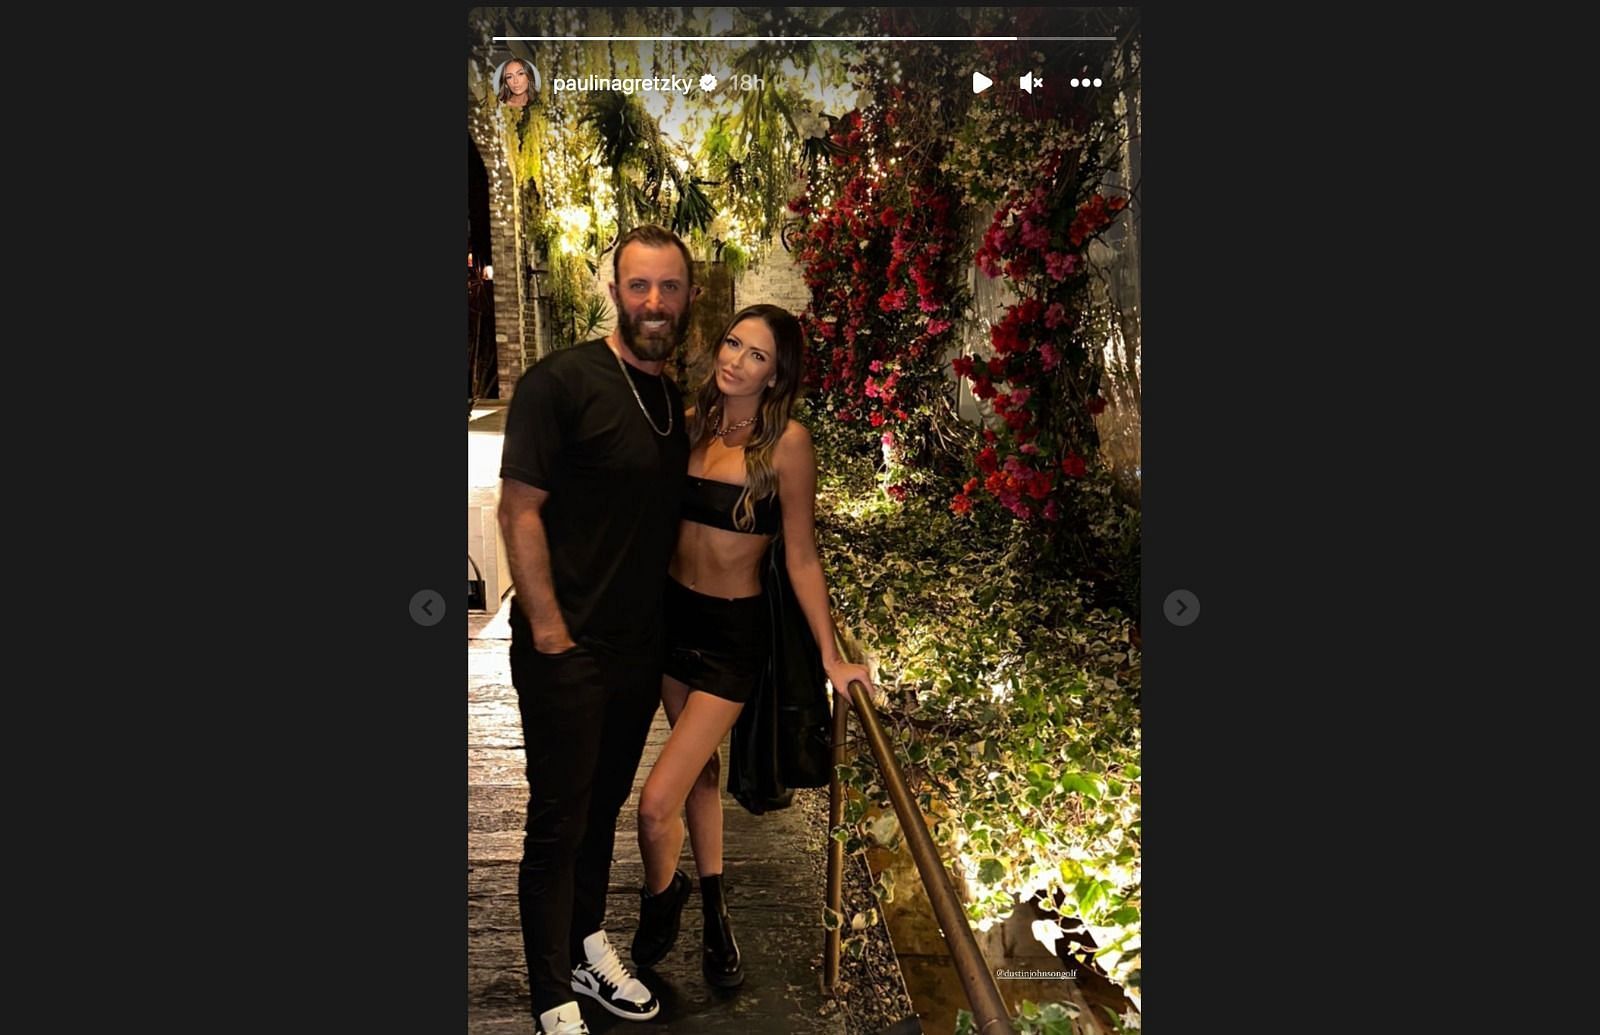 Paulina Gretzky and Dustin Johnson: Her most supportive moments